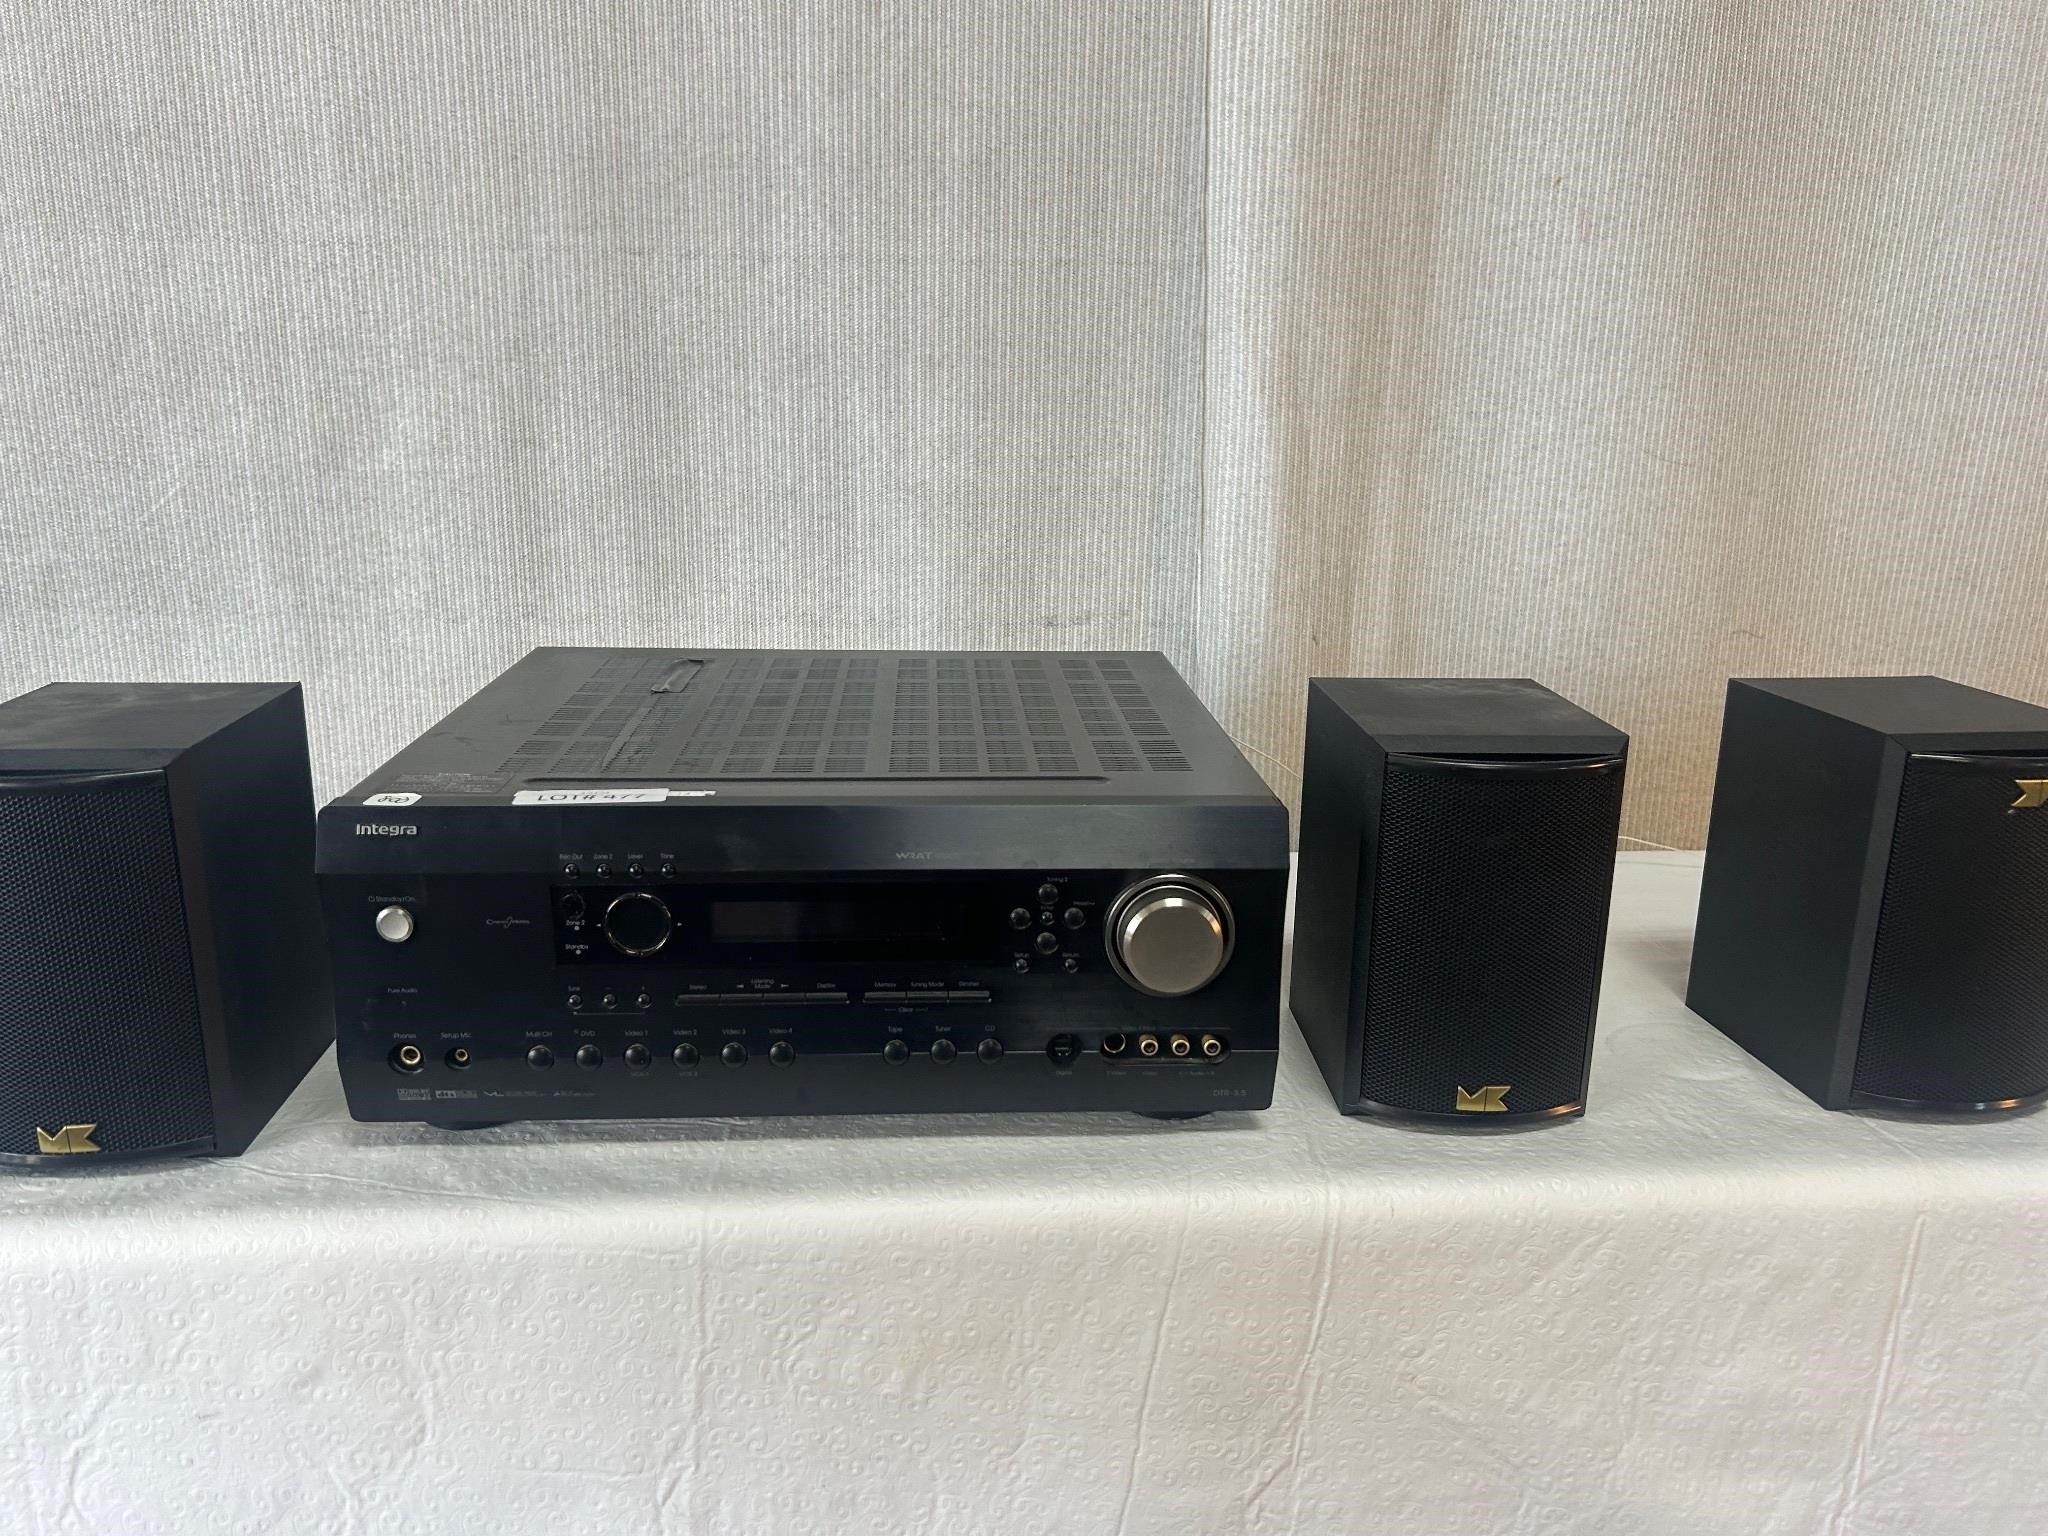 Integra Stereo Receiver with M&K Speakers